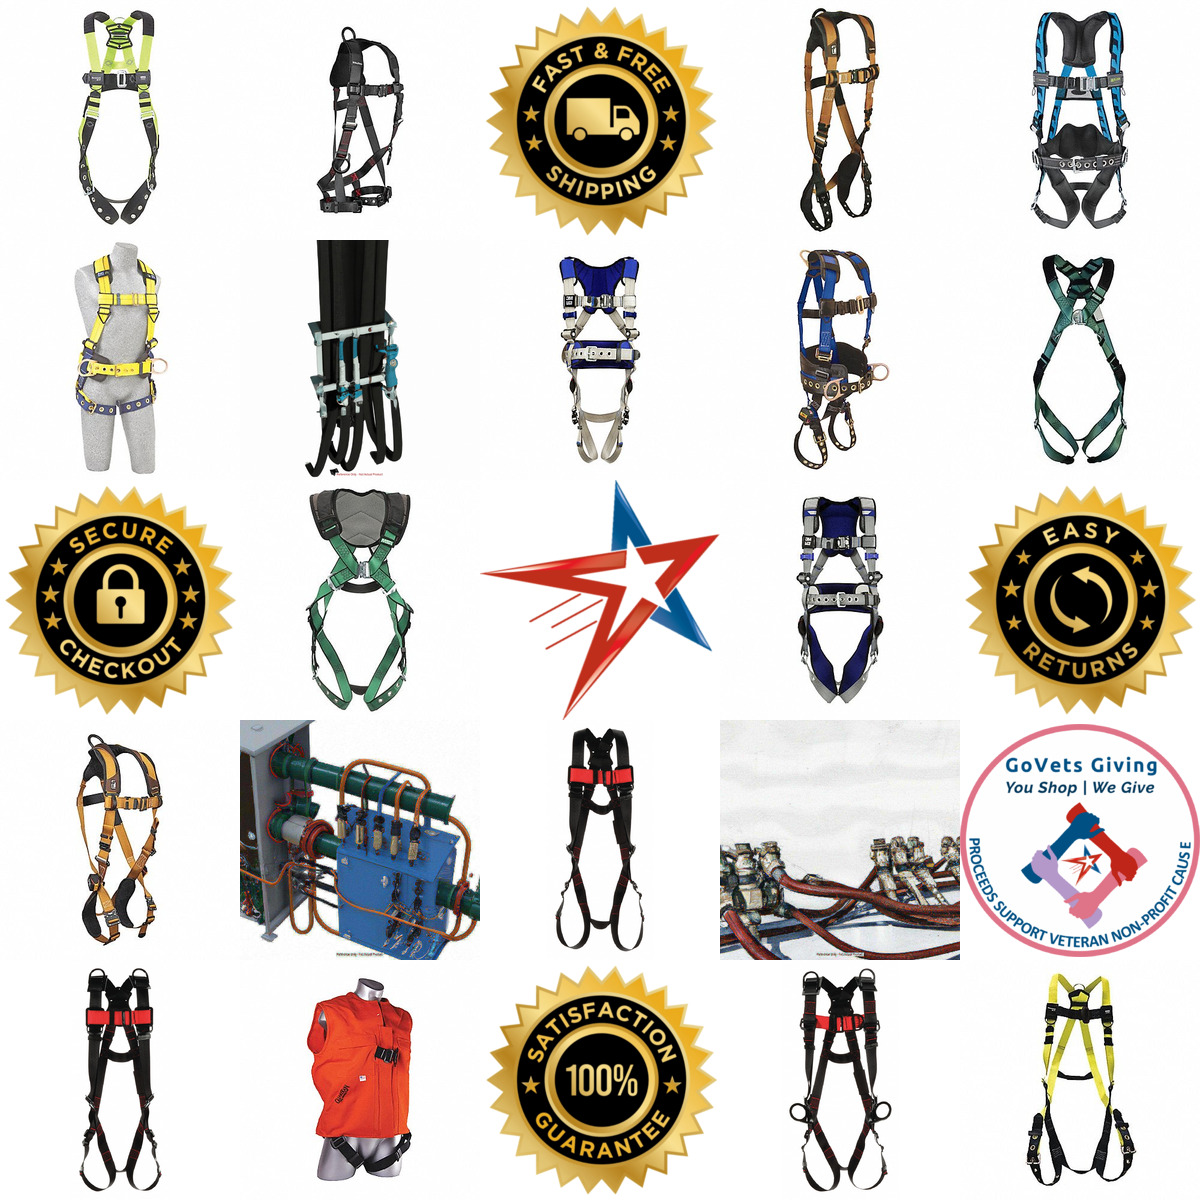 A selection of Harnesses products on GoVets